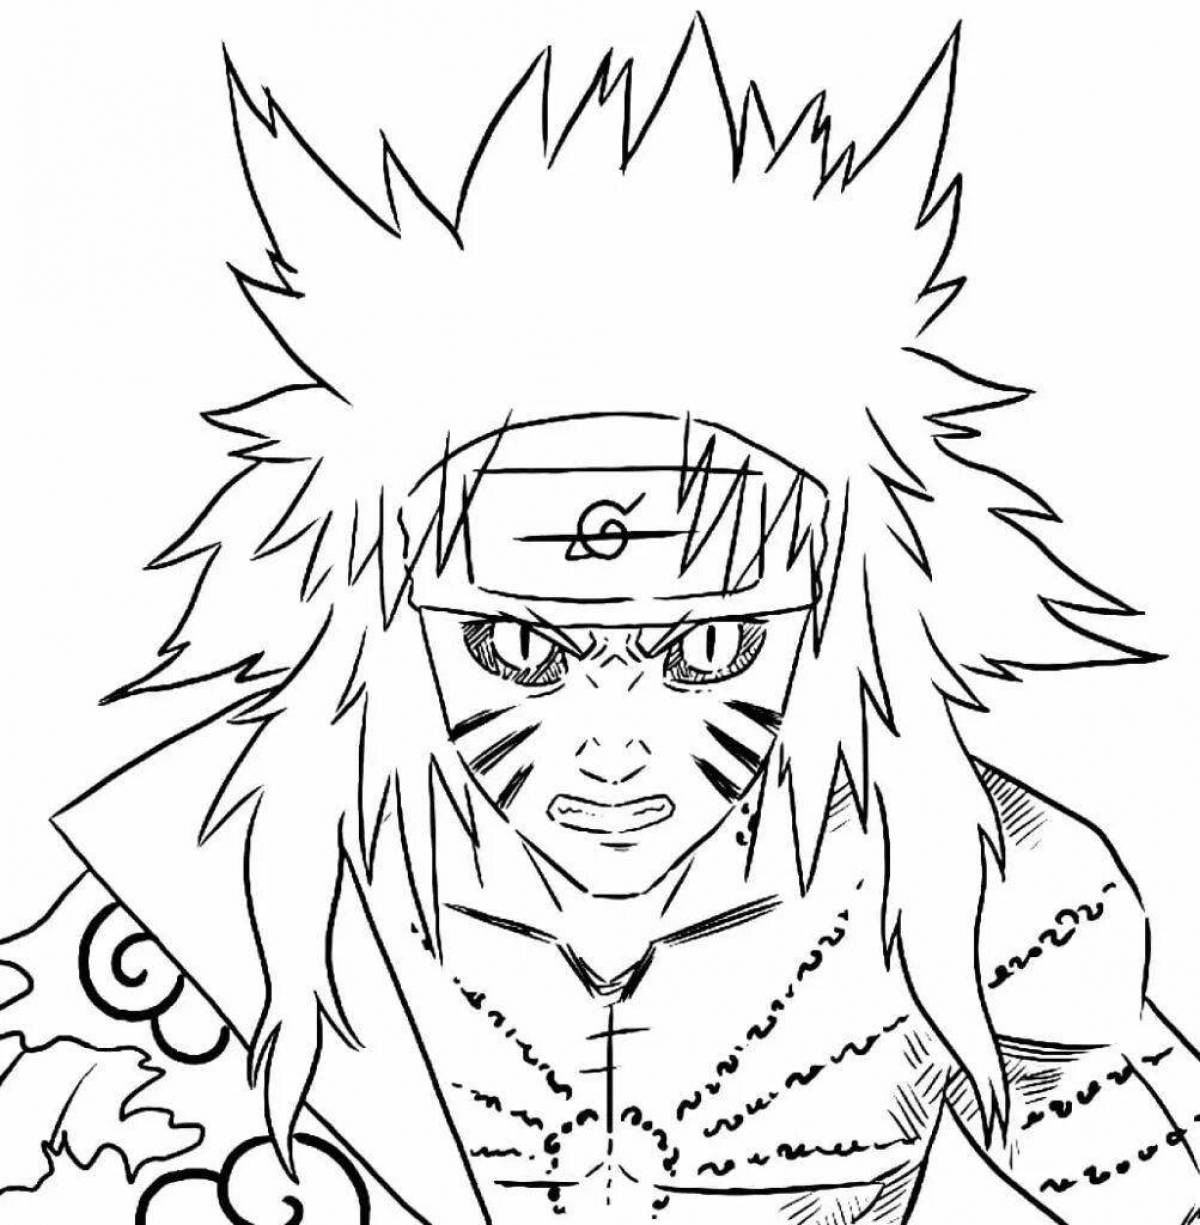 Charming akatsuki all coloring pages